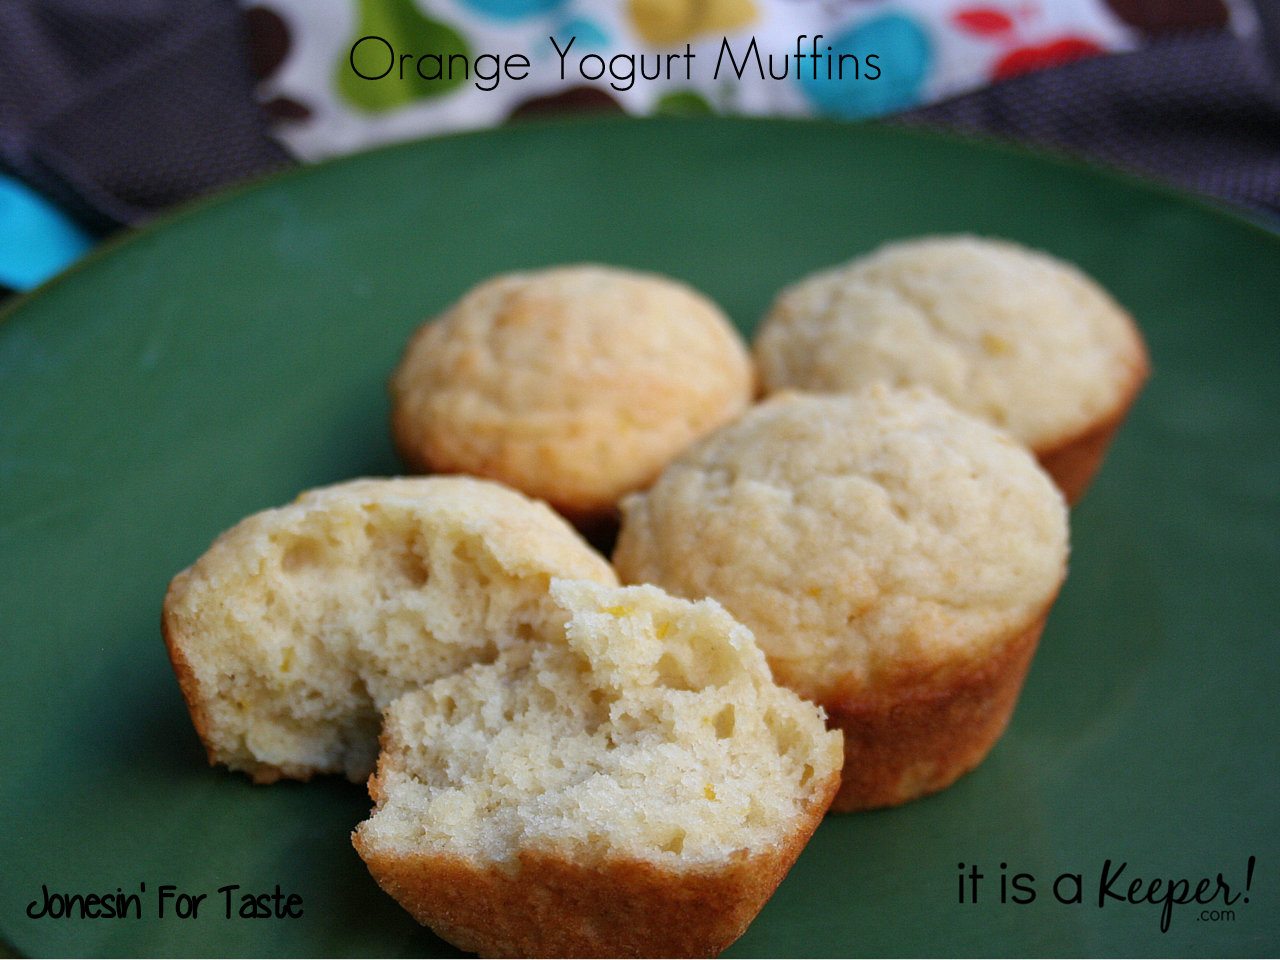 Tangy Orange Yogurt Muffins are an easy breakfast recipe that's ready in 30 minutes.